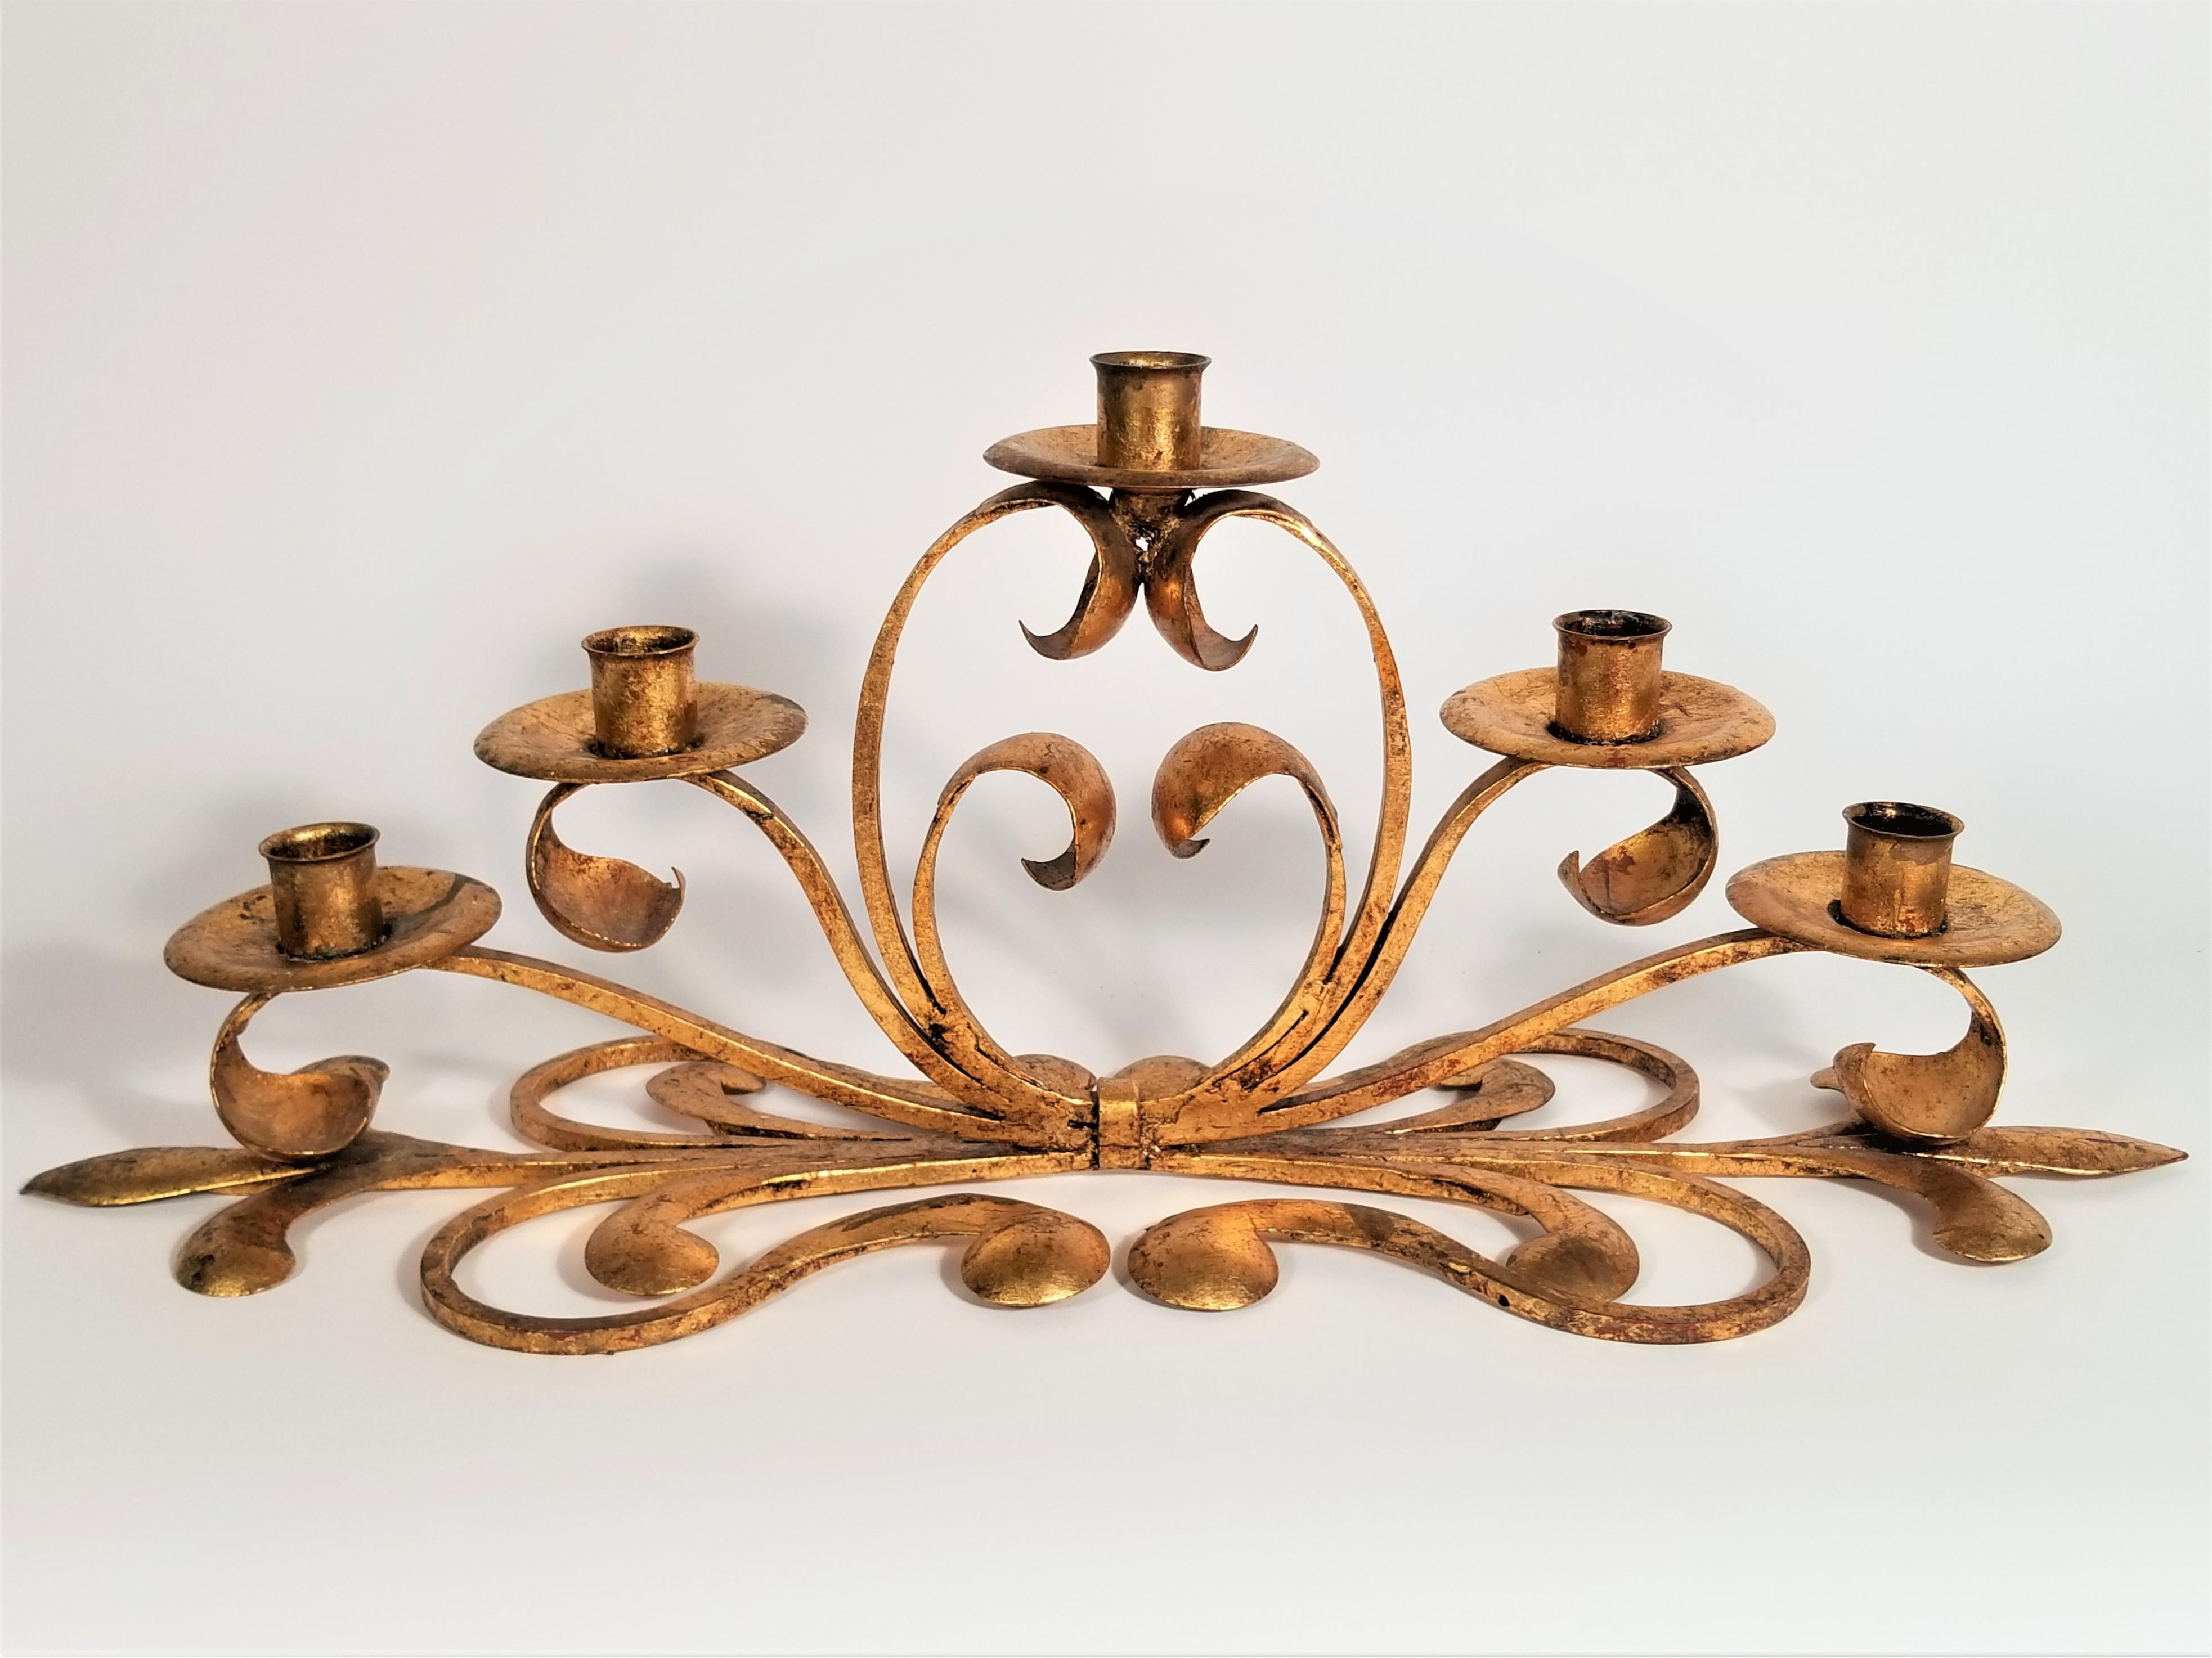 Italian Authentic Signed S. Salvadori made in Italy. Midcentury 1950s gilt iron candelabra or candleholder. 5 arms and holders.
  